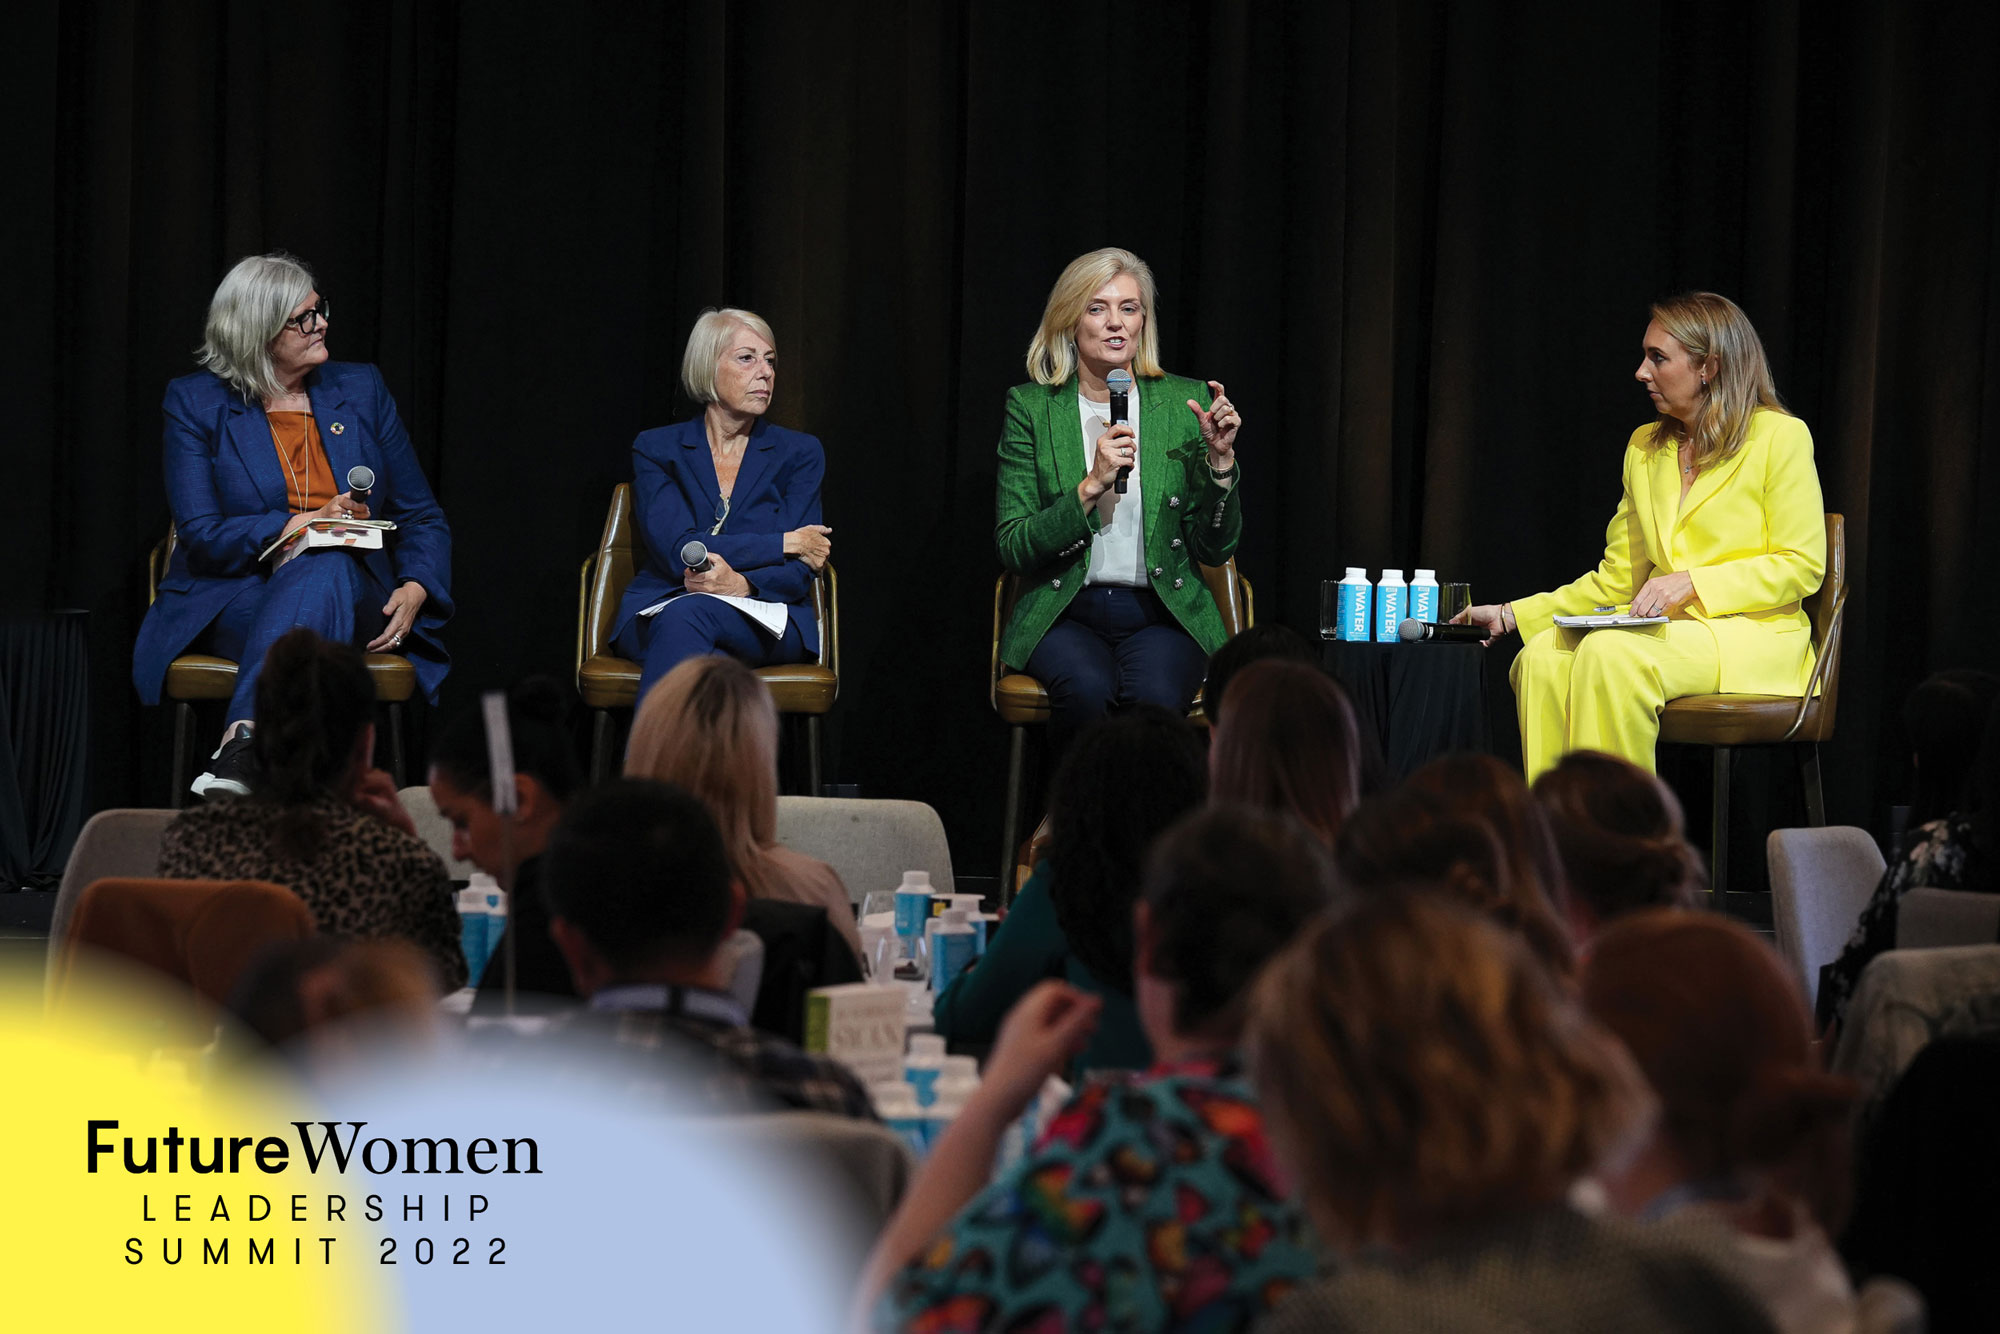 From left to right: Sam Mostyn, Louise Adler, Catherine Brenner and Lizzie Young on stage at Future Women's Leadership Summit 2022